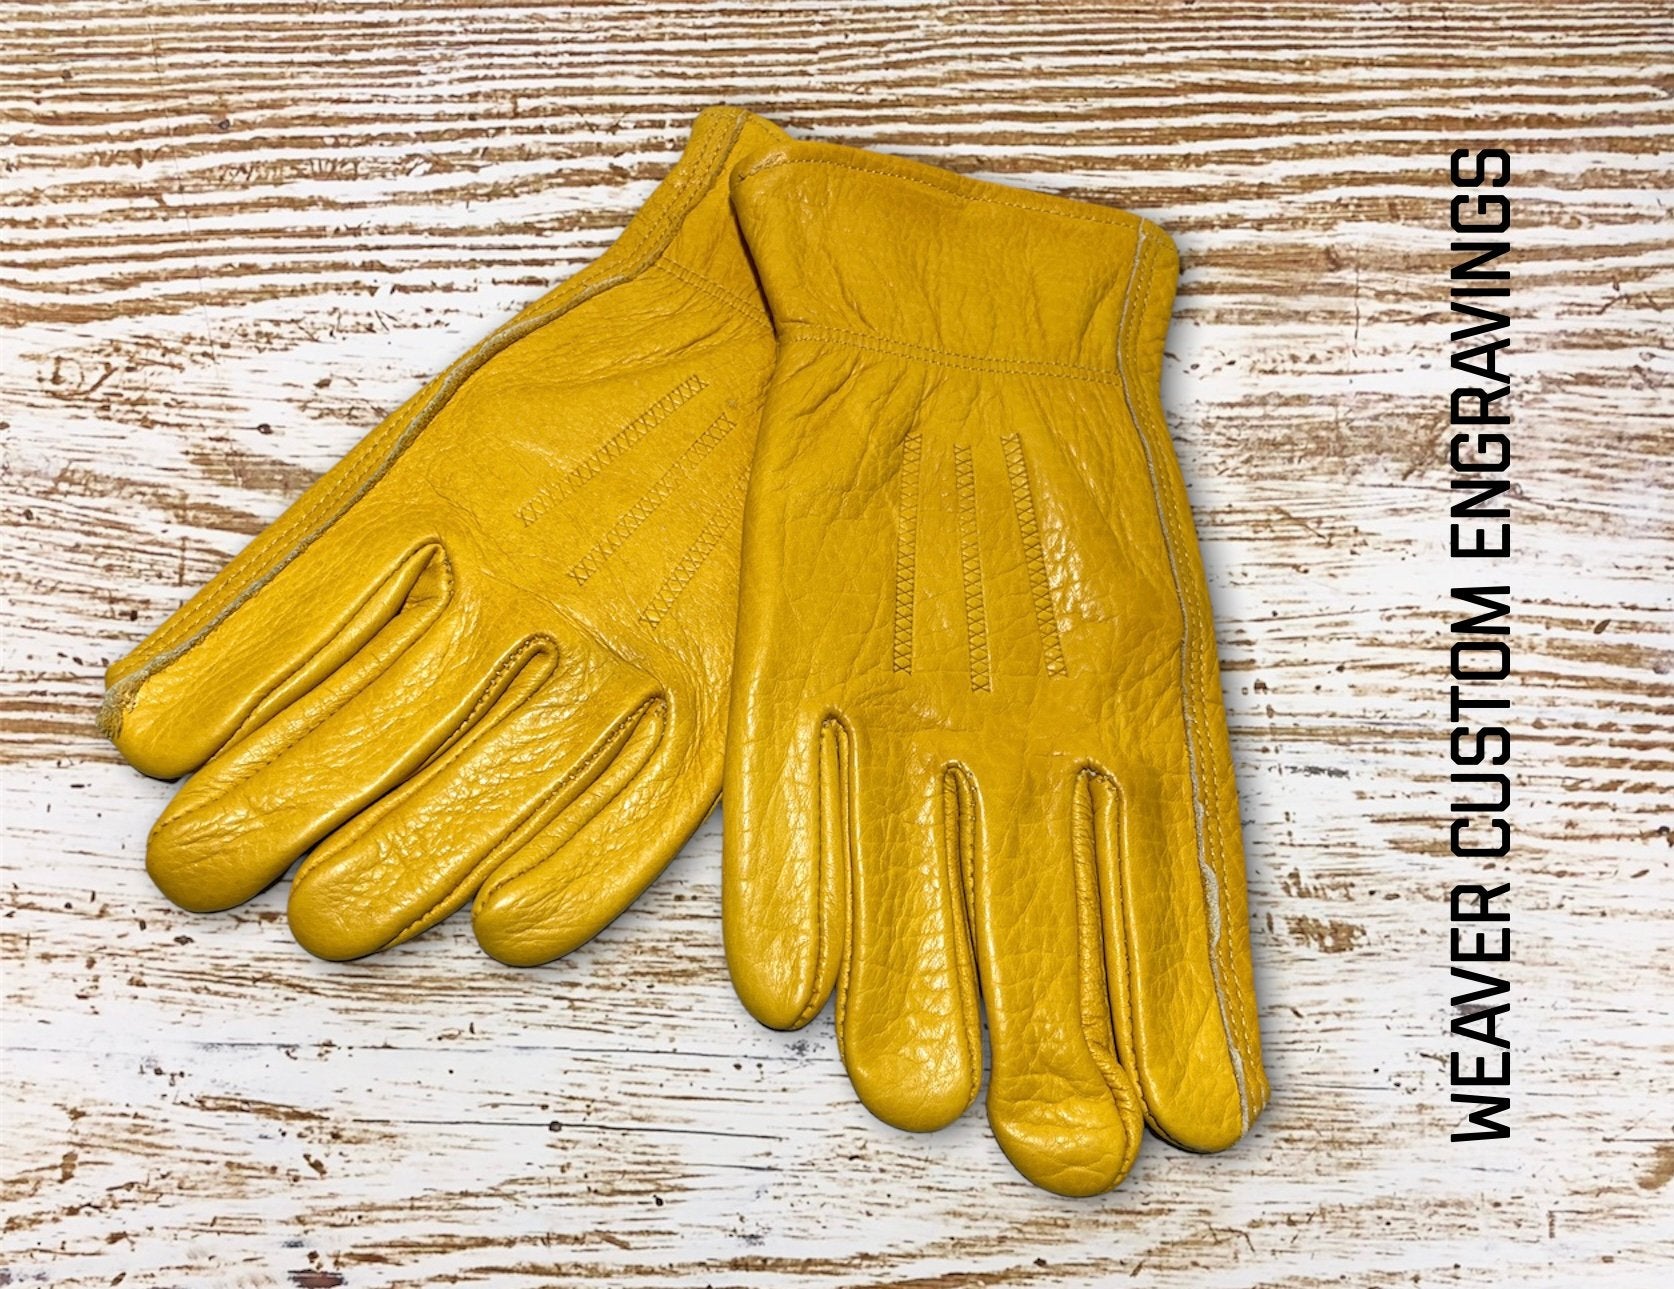 Custom Promotional Canvas Work Gloves with Grip Dots